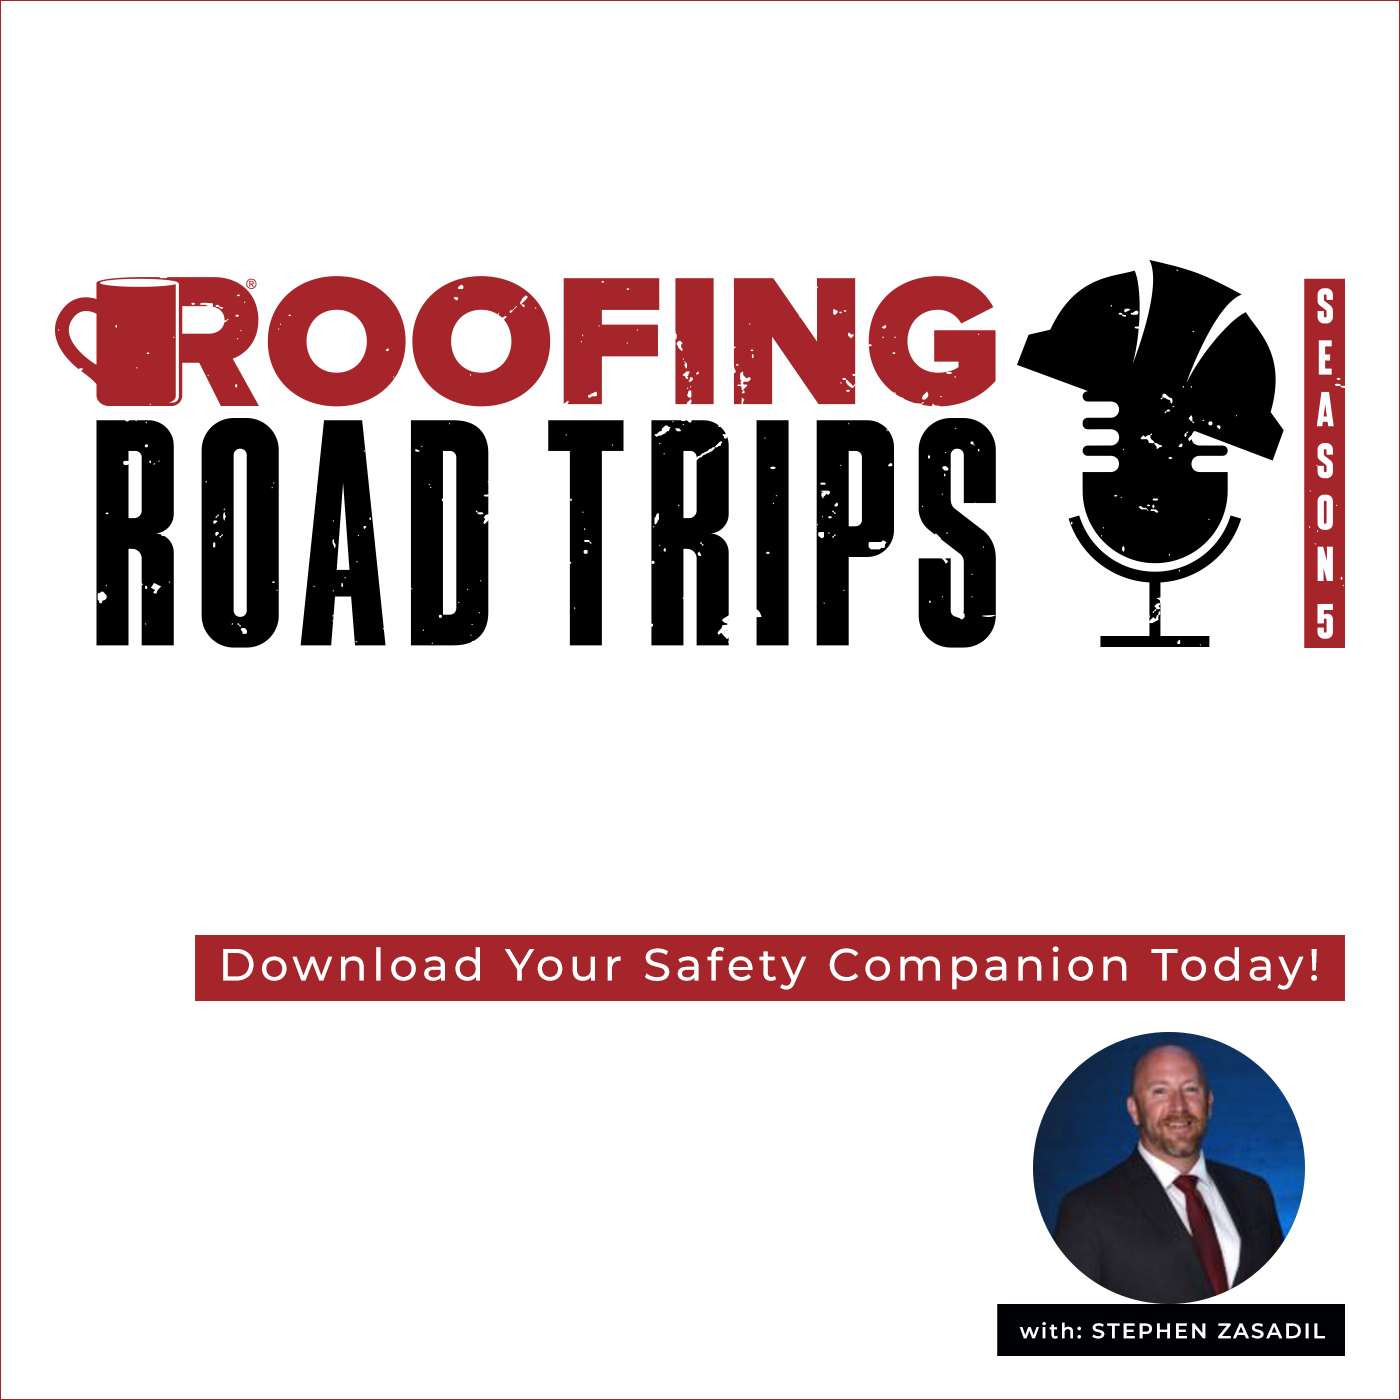 Stephen Zasadil - Download Your Safety Companion Today